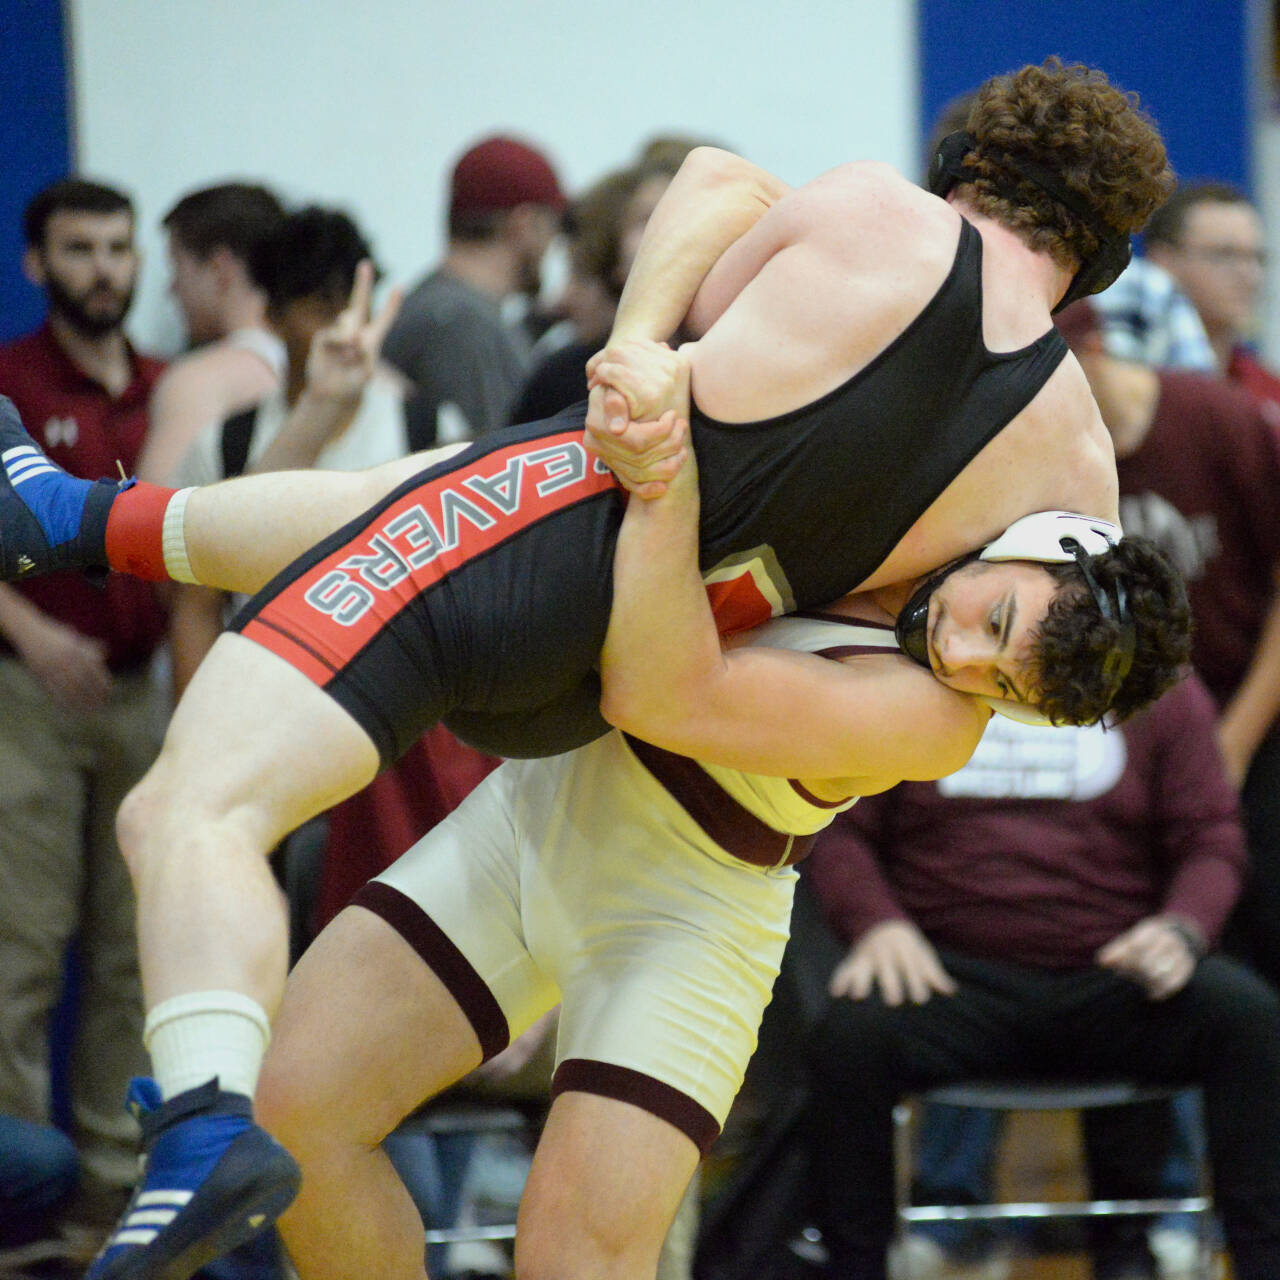 RYAN SPARKS | THE DAILY WORLD Montesano’s Mateo Sanchez, right, picks up Tenino’s Randy Marti during the 182-pound final of the Grays Harbor Championships on Saturday at Sam Benn Gym in Aberdeen.